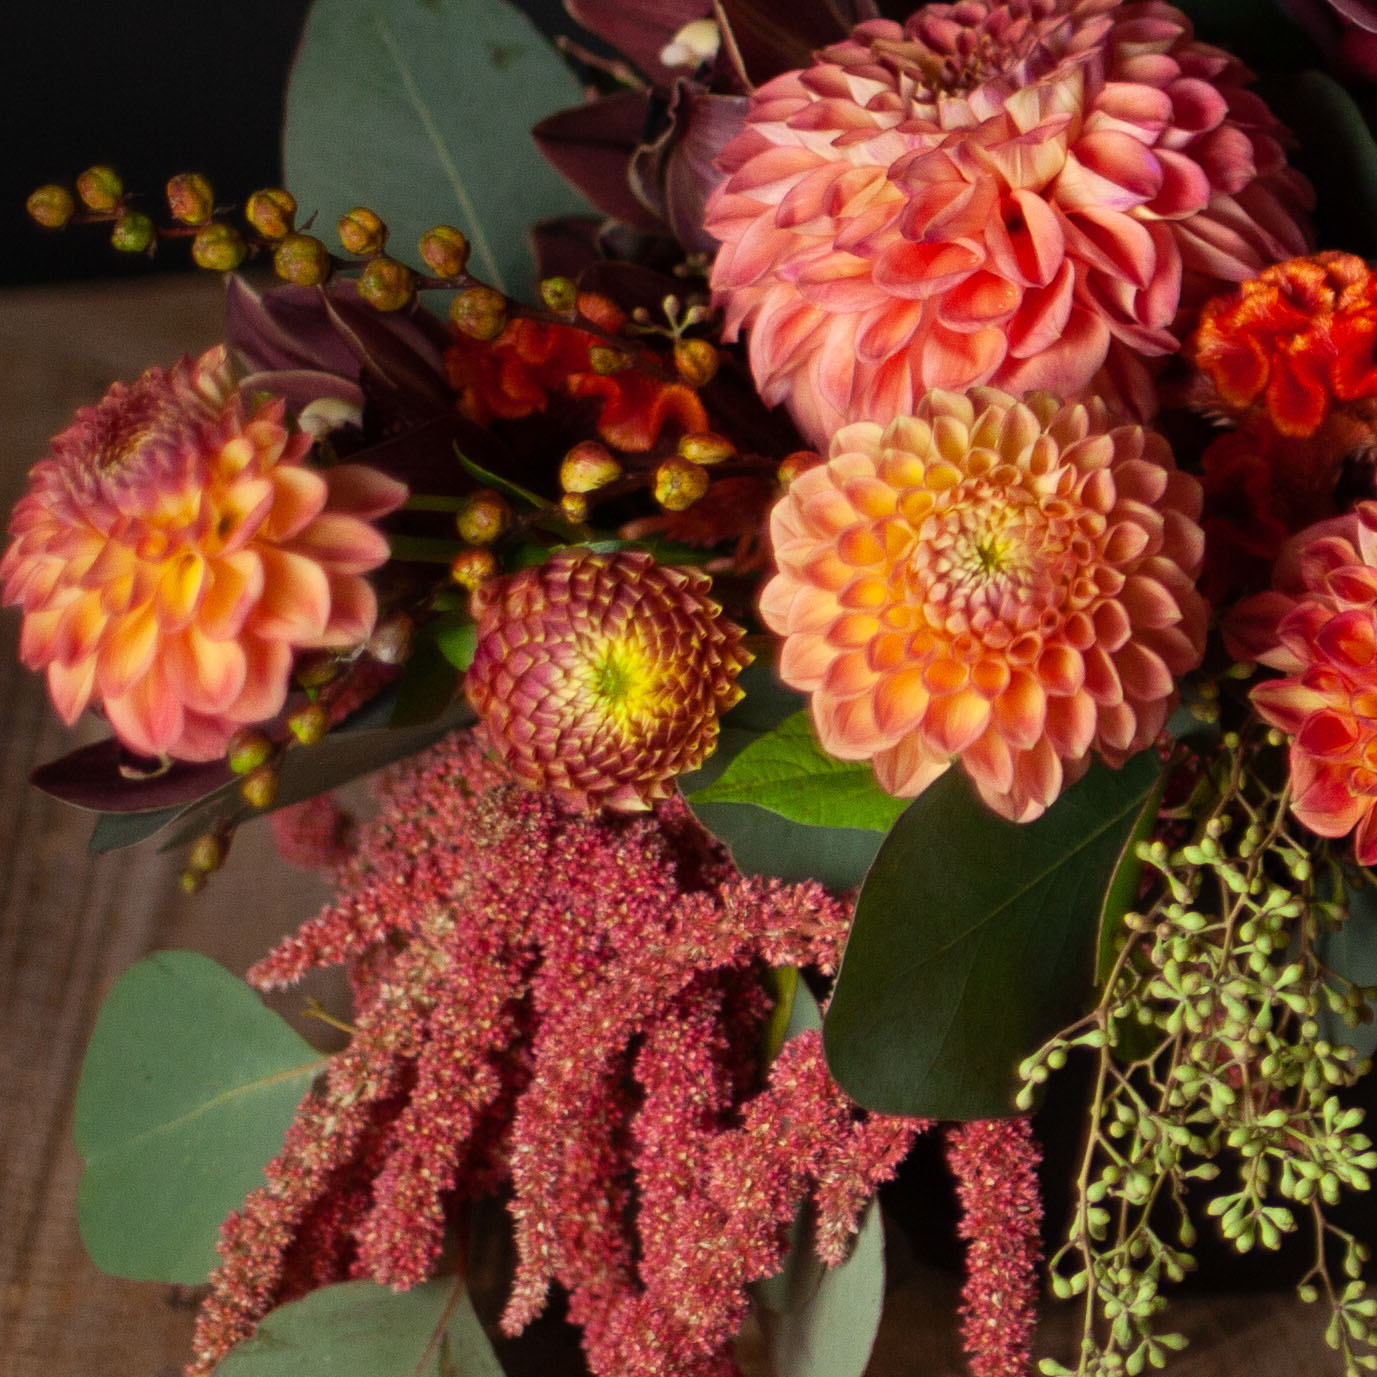 Local and Lush Floral Workshop - Saturday, August 17